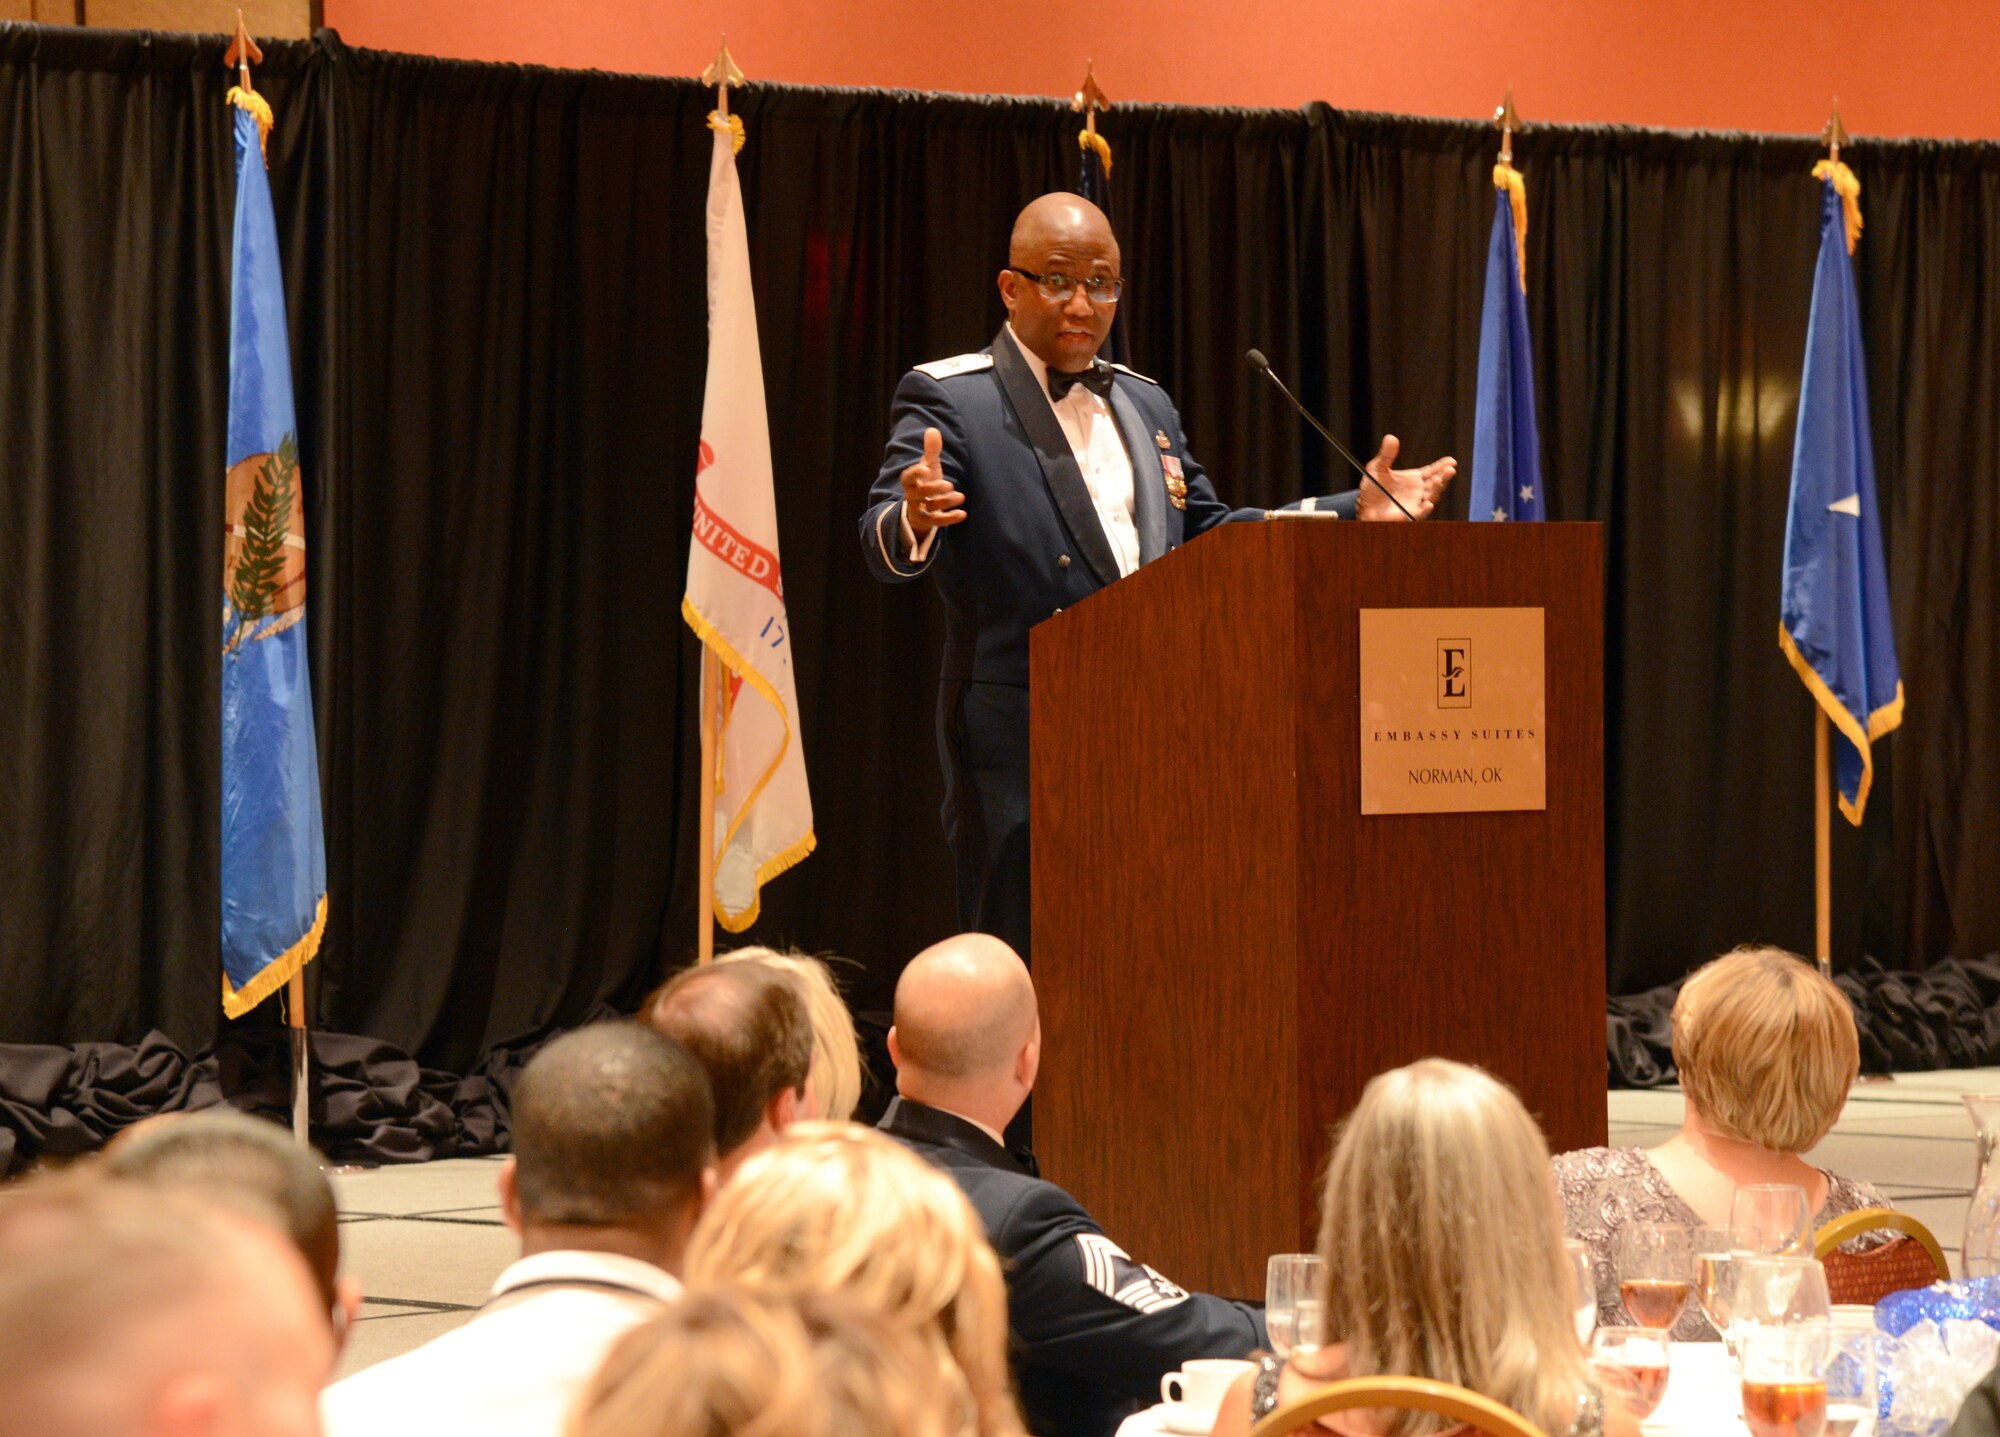 Brig. Gen. Allen Jamerson, director of Security Forces and deputy chief of staff for Logistics, Engineering and Force Protection at Headquarters U.S. Air Force, speaks to more than 600 attendees at the Air Force Ball Sept. 12 in Norman. General Jamerson mentioned the things he loved about Tinker Air Force Base during his time as the 72nd Air Base Wing commander from July 2008 to June 2010. (Air Force photo by Kelly White/Released)